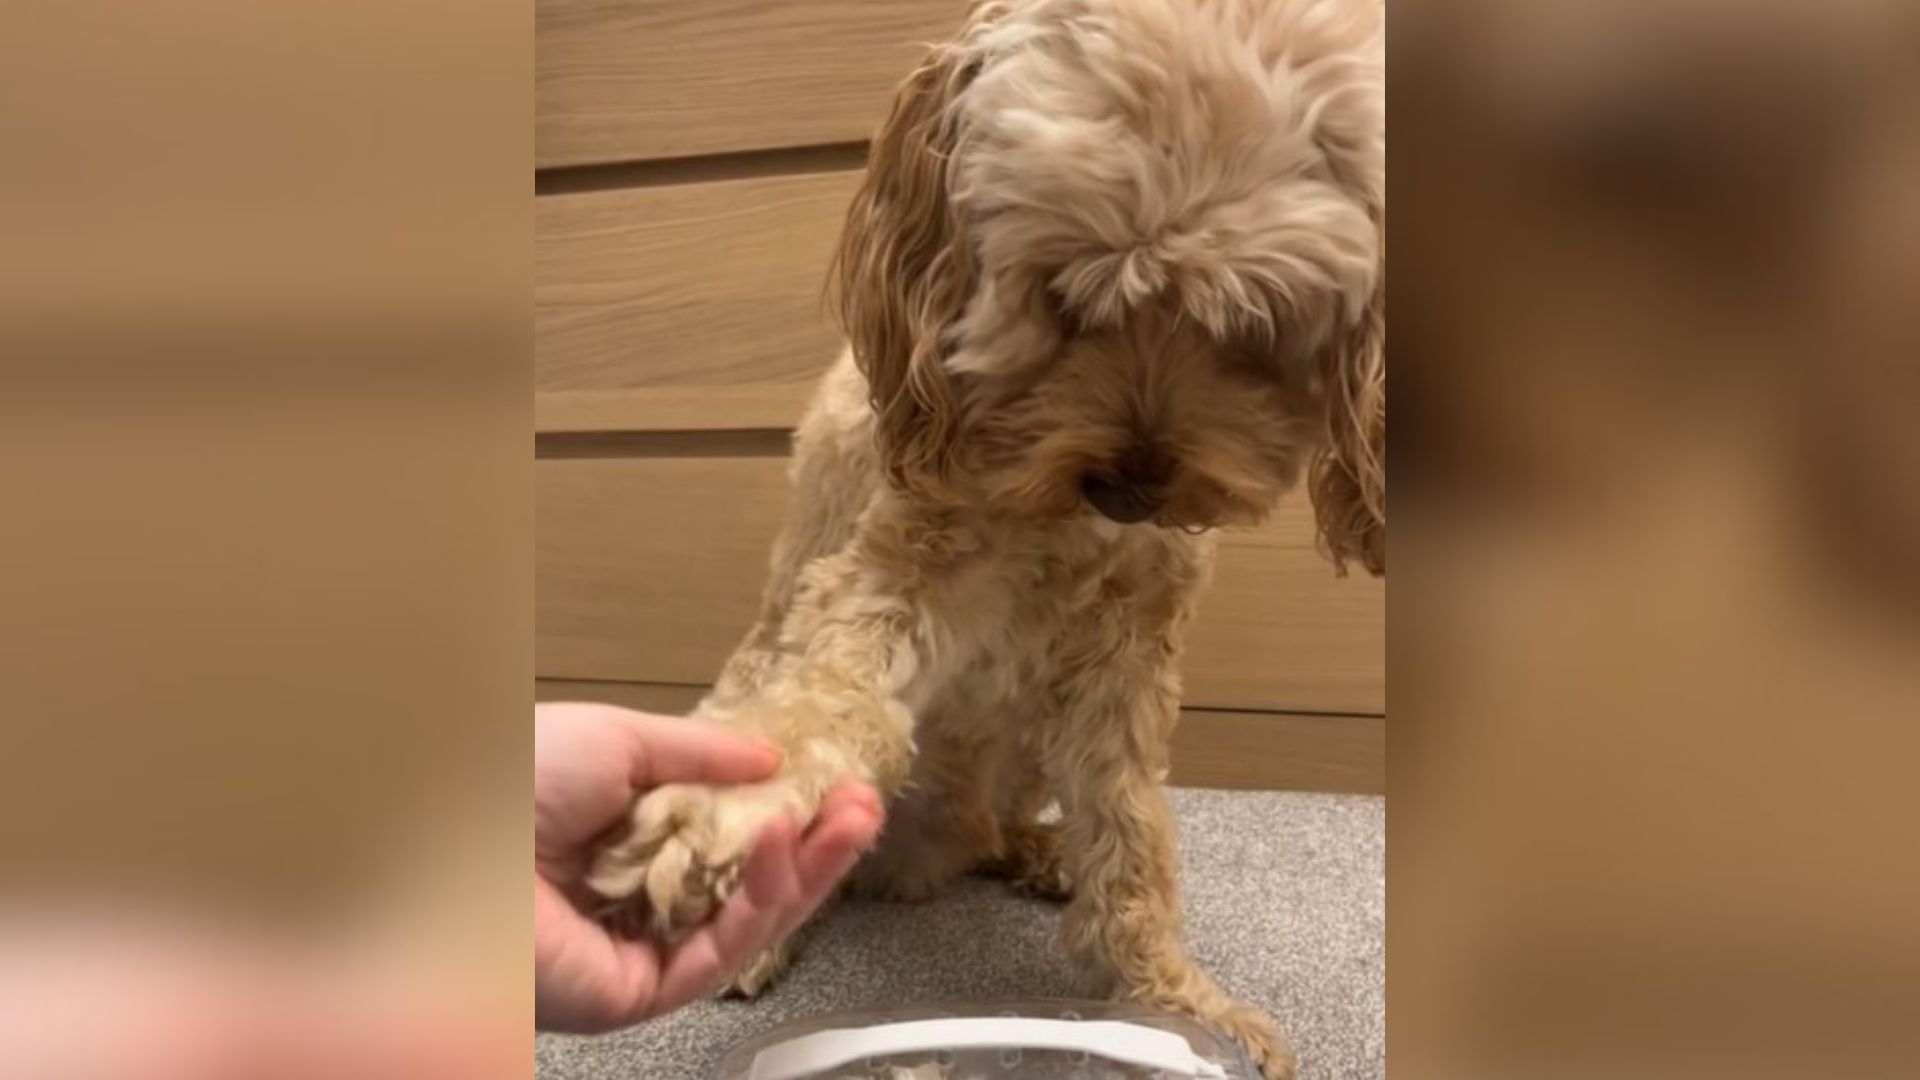 Heartbroken Pup Started To Cry When His Best Friend Passed Away Suddenly